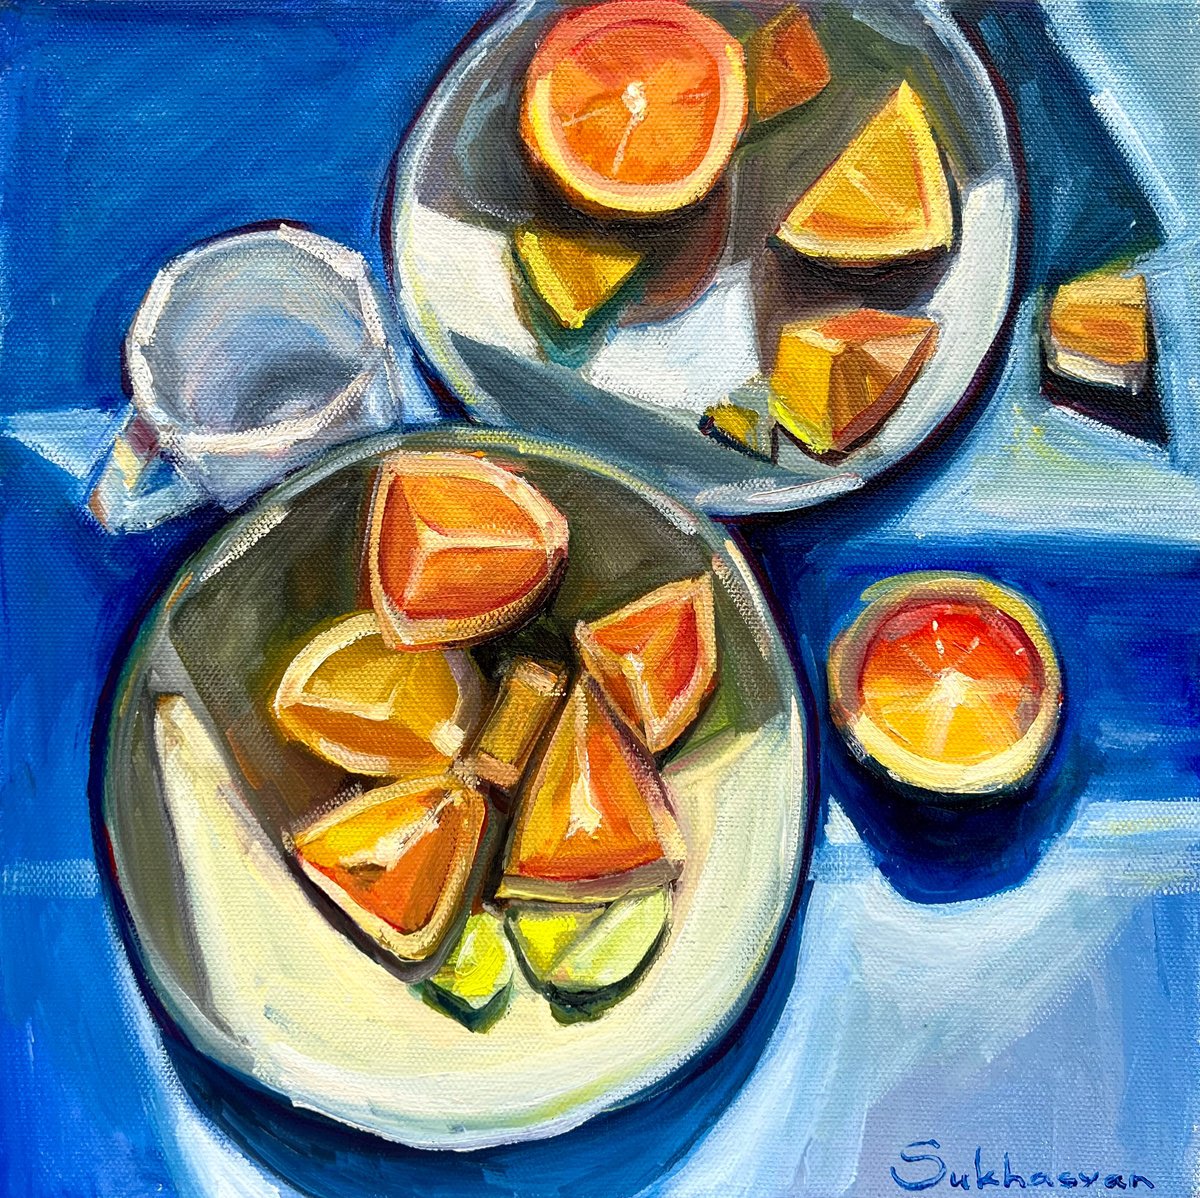 Still life with Oranges by Victoria Sukhasyan